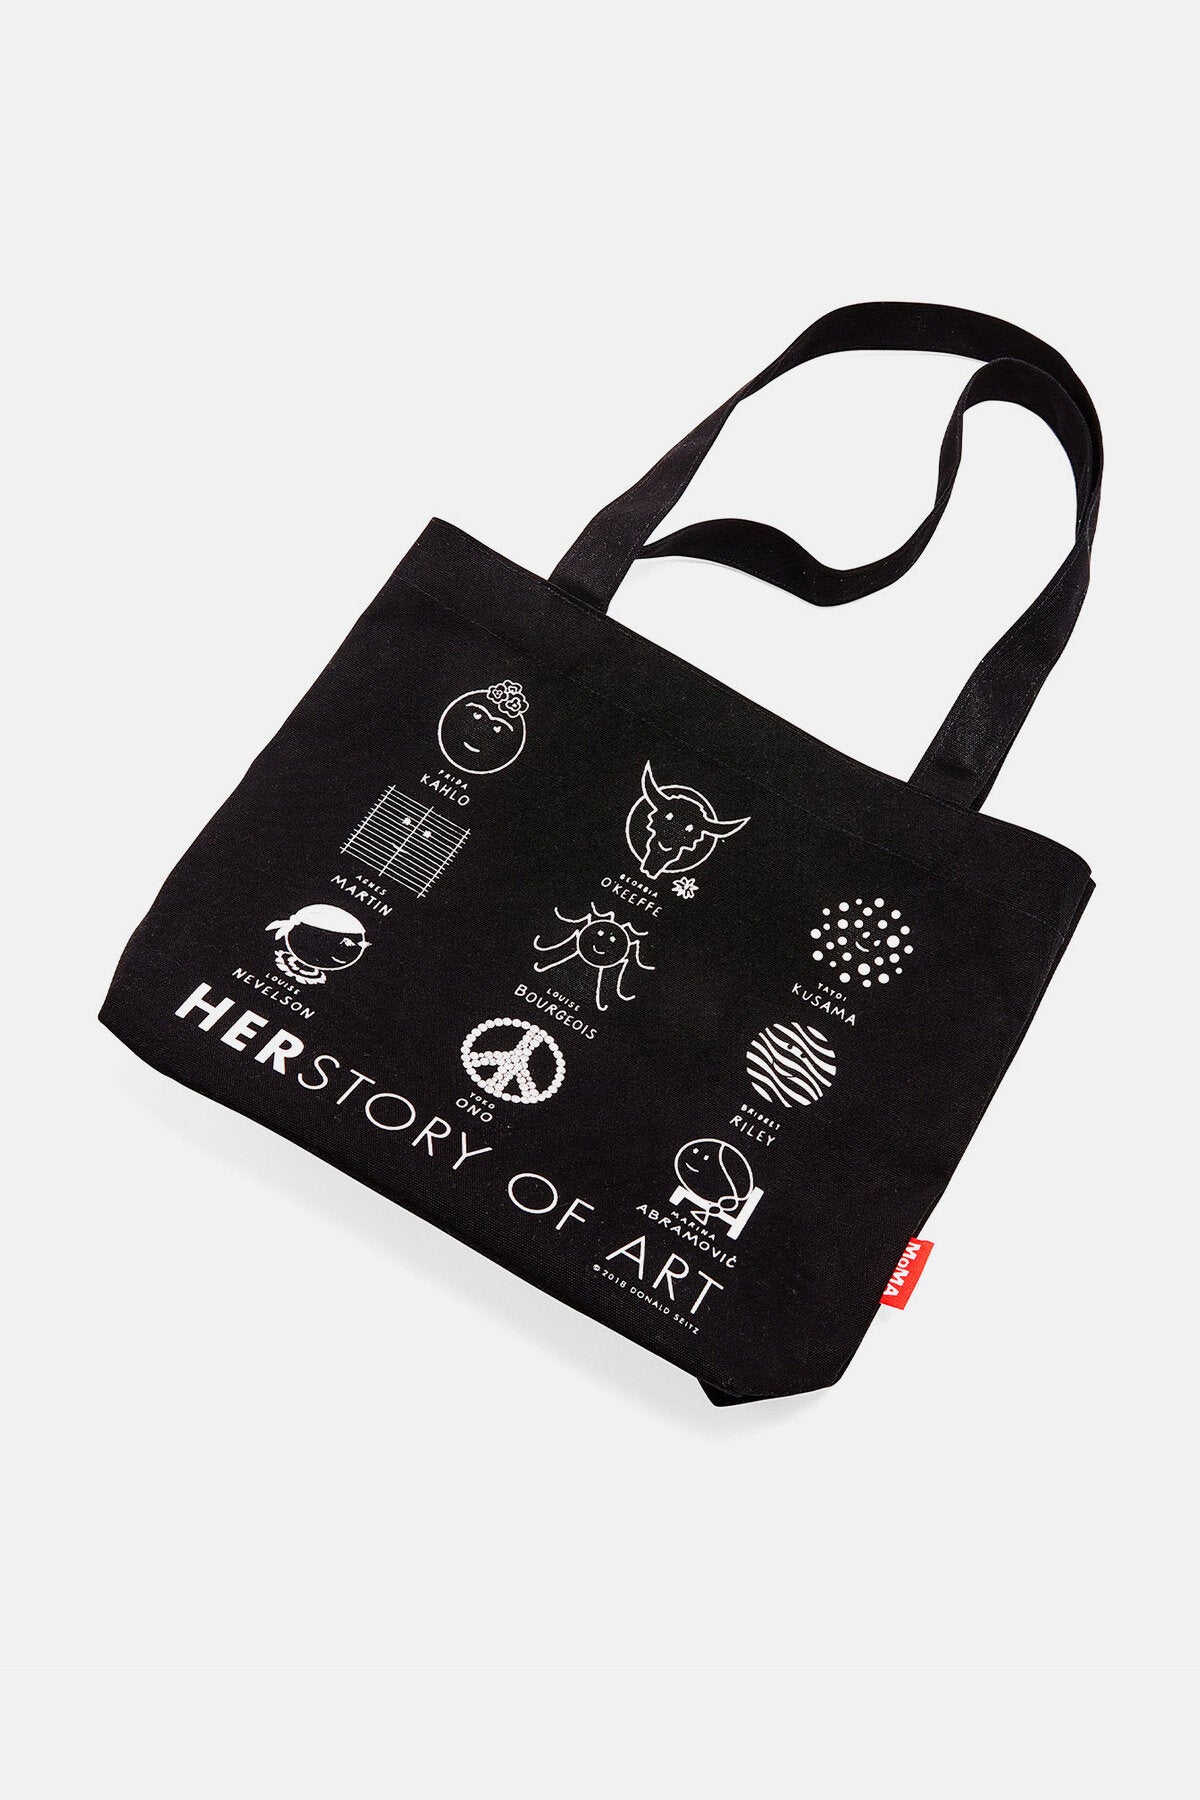 History of Art Tote